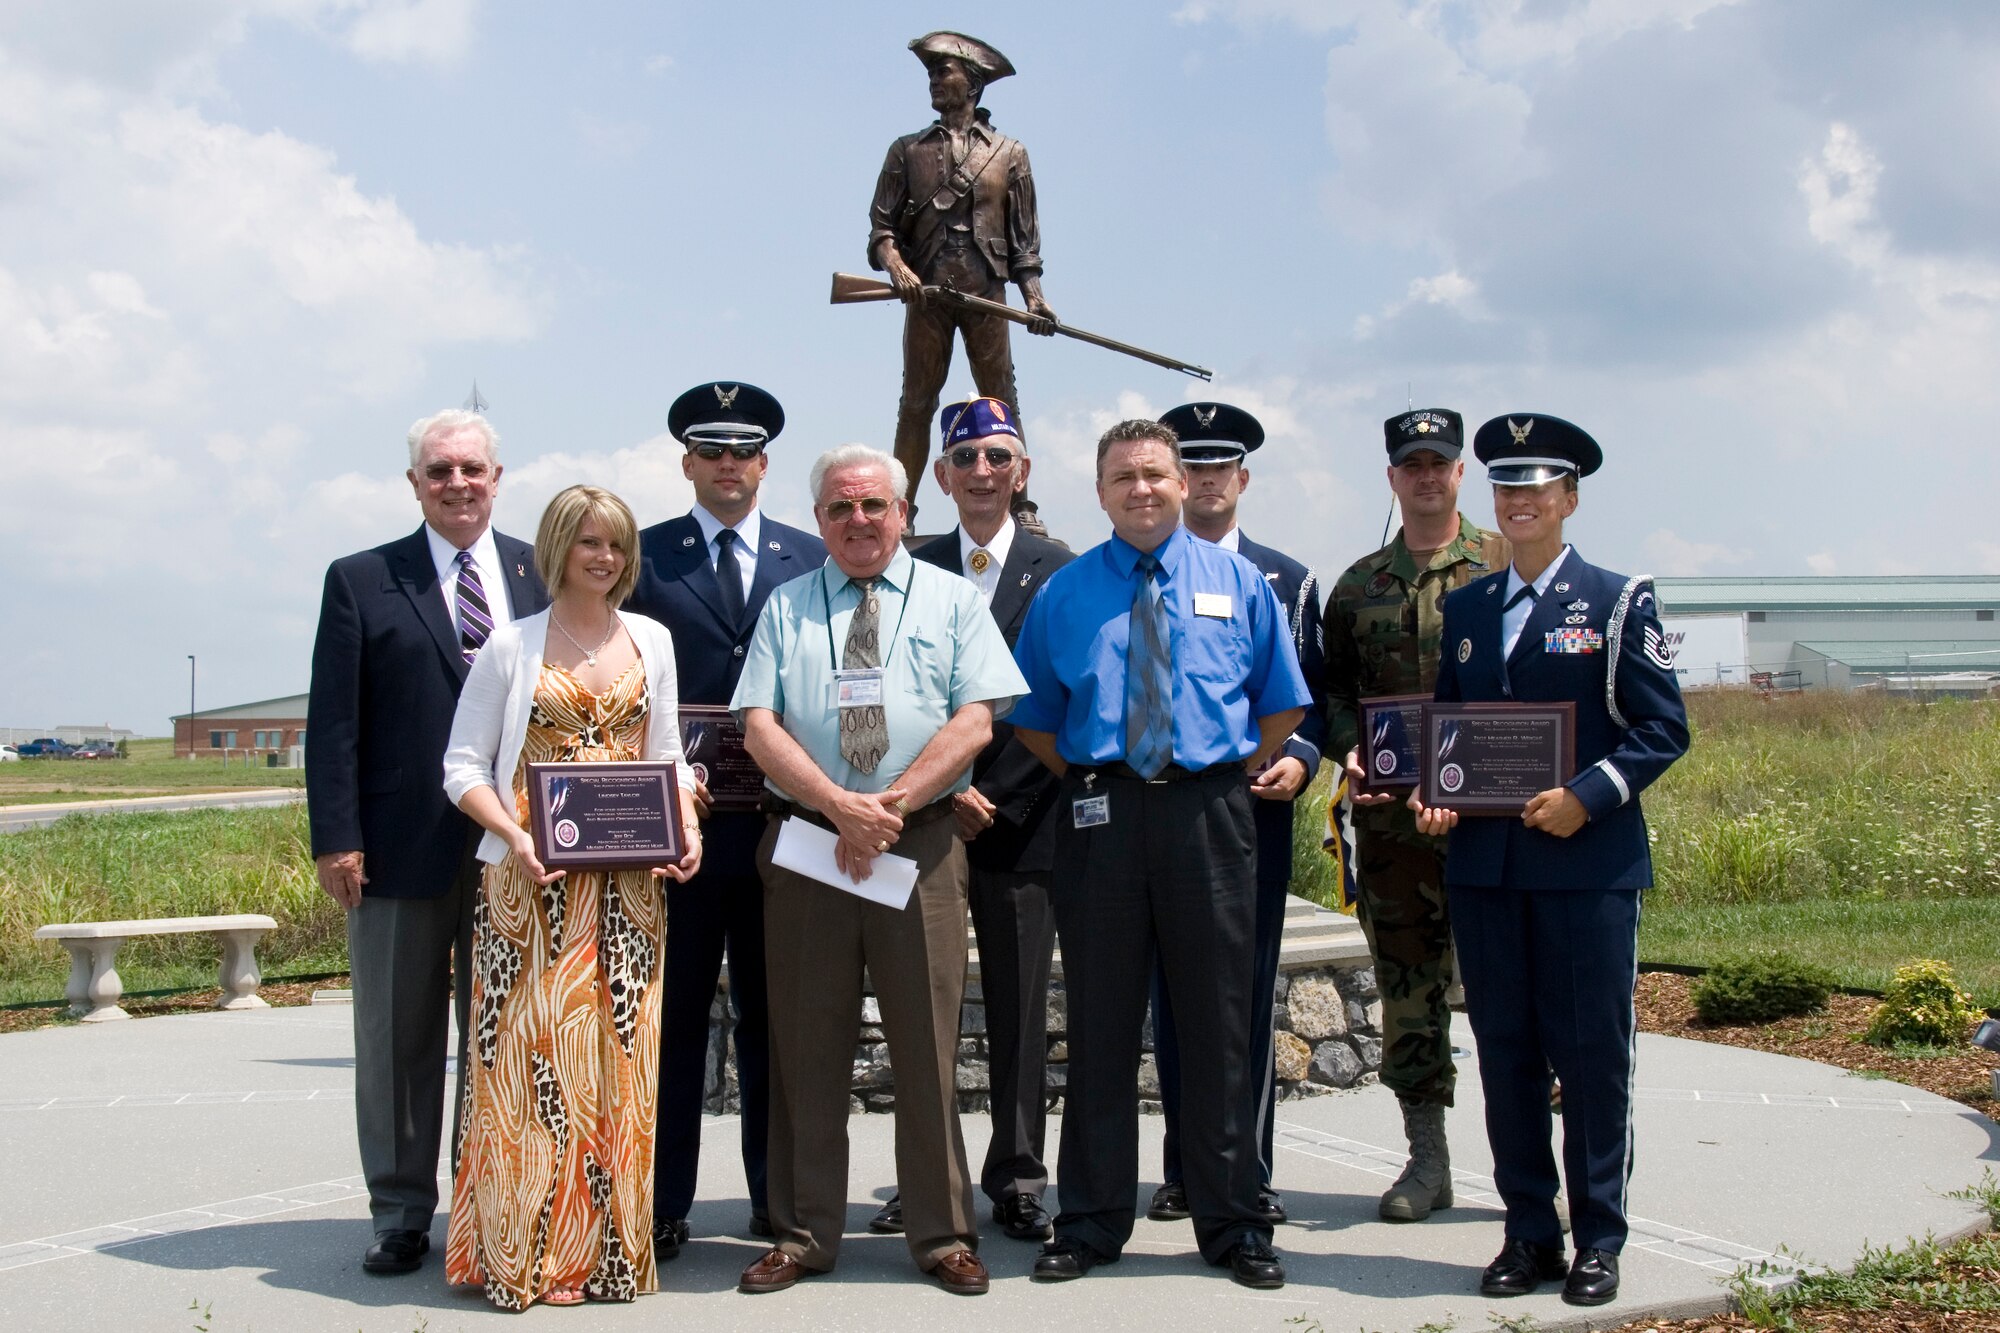 West Virginia Military Order of the Purple Heart presented members of the 167th Airlift Wing Base Honor Guard and Lindsey Taylor plaques of appreciation for their participation in a job fair and business opportunities summit held at the Martinsburg Veterans Administration Medical Center in June. The plaques were presented during a ceremony at the 167th Airlift Wing on August 1, 2009. In the front row, Lindsey Taylor, Otis Batten, Work Force West Virginia, Local Veterans Employment Rep, Monty Hogbin, Work Force West Virginia, Disabled Veterans Outreach Program Specialist, Tech Sergeant Heather Wright. Back row, Cy Kammeier, Commander Chapter 646, Military Order of the Purple Heart, Staff Sergeant Nic Krukowski, Richard Seeley, Department Commander WV, Military Order of the Purple Heart, Tech Sergeant William Stuller, and Major Paul Henry, 167th Airlift Wing Base Honor Guard, Officer in Charge. (U.S. Air Force photo by Master Sgt Emily Beightol-Deyerle)